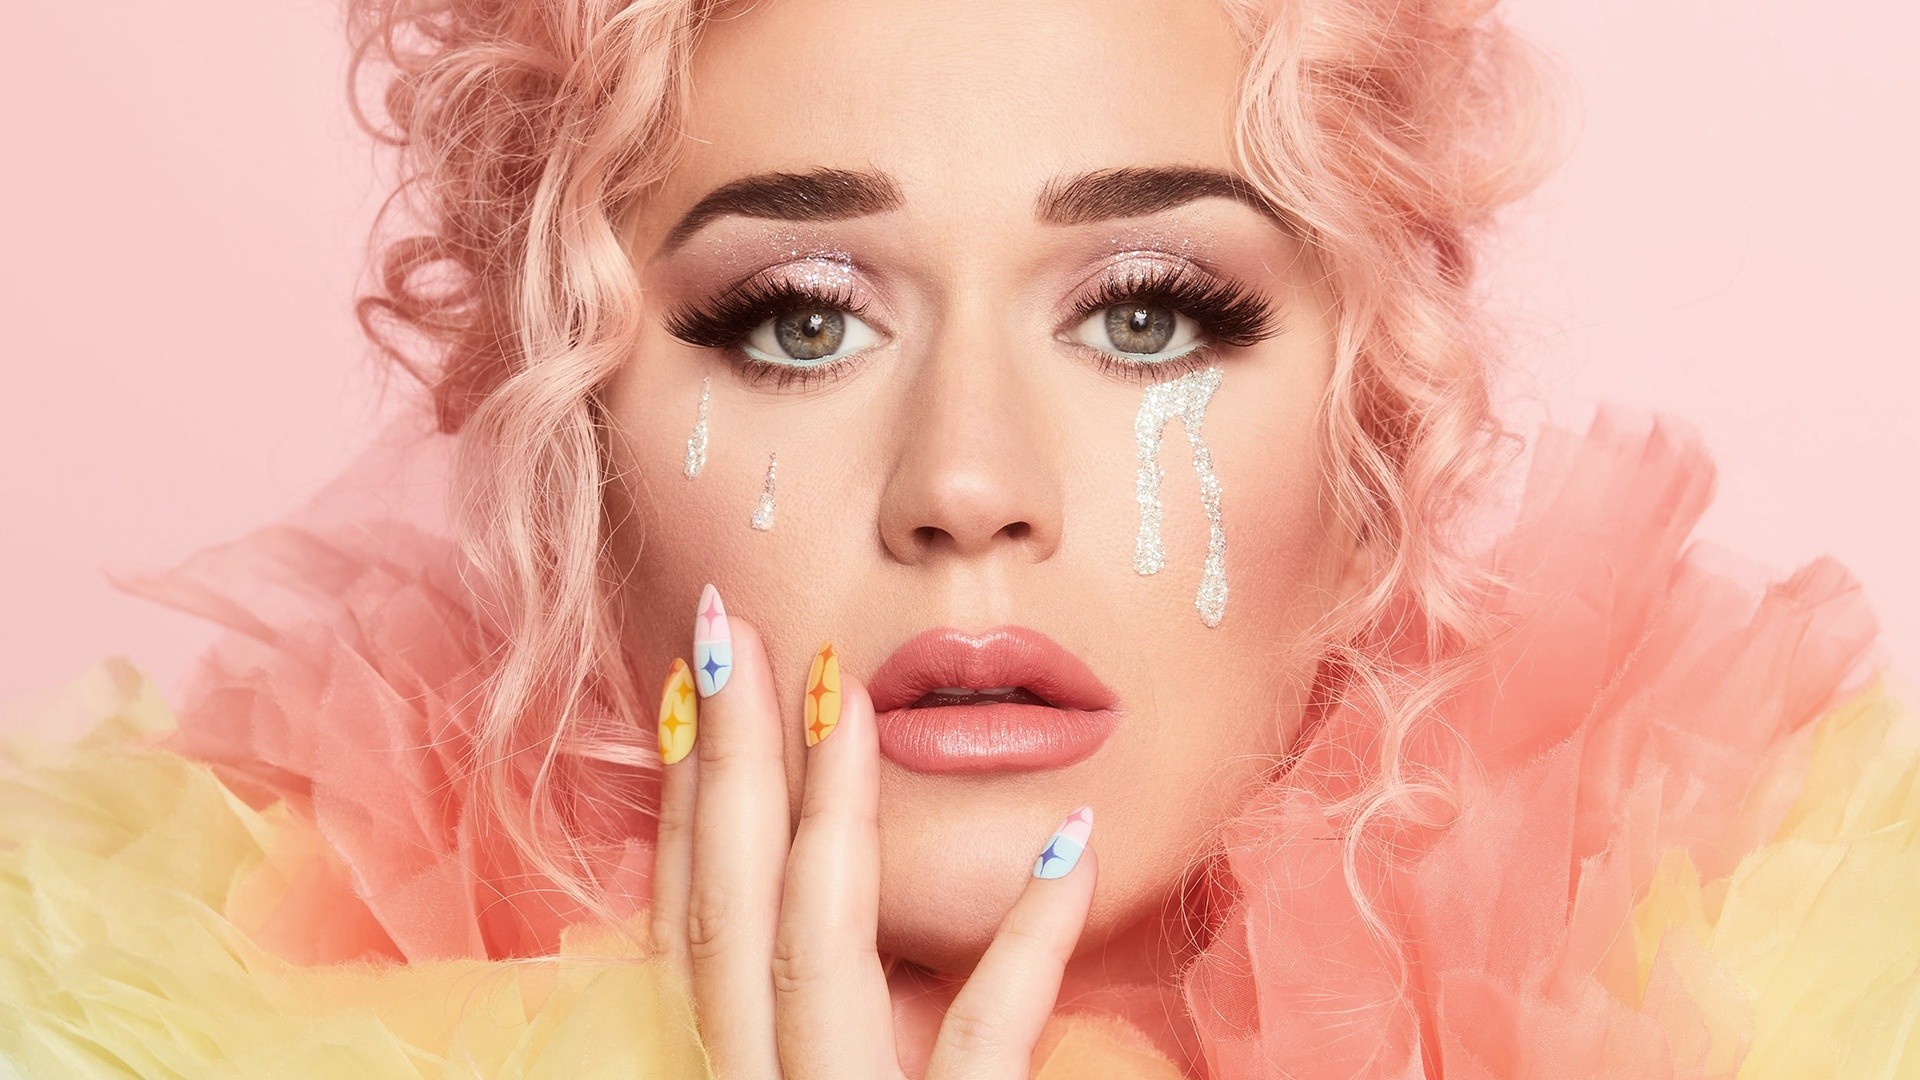 Katy Perry with lollipop Wallpapers